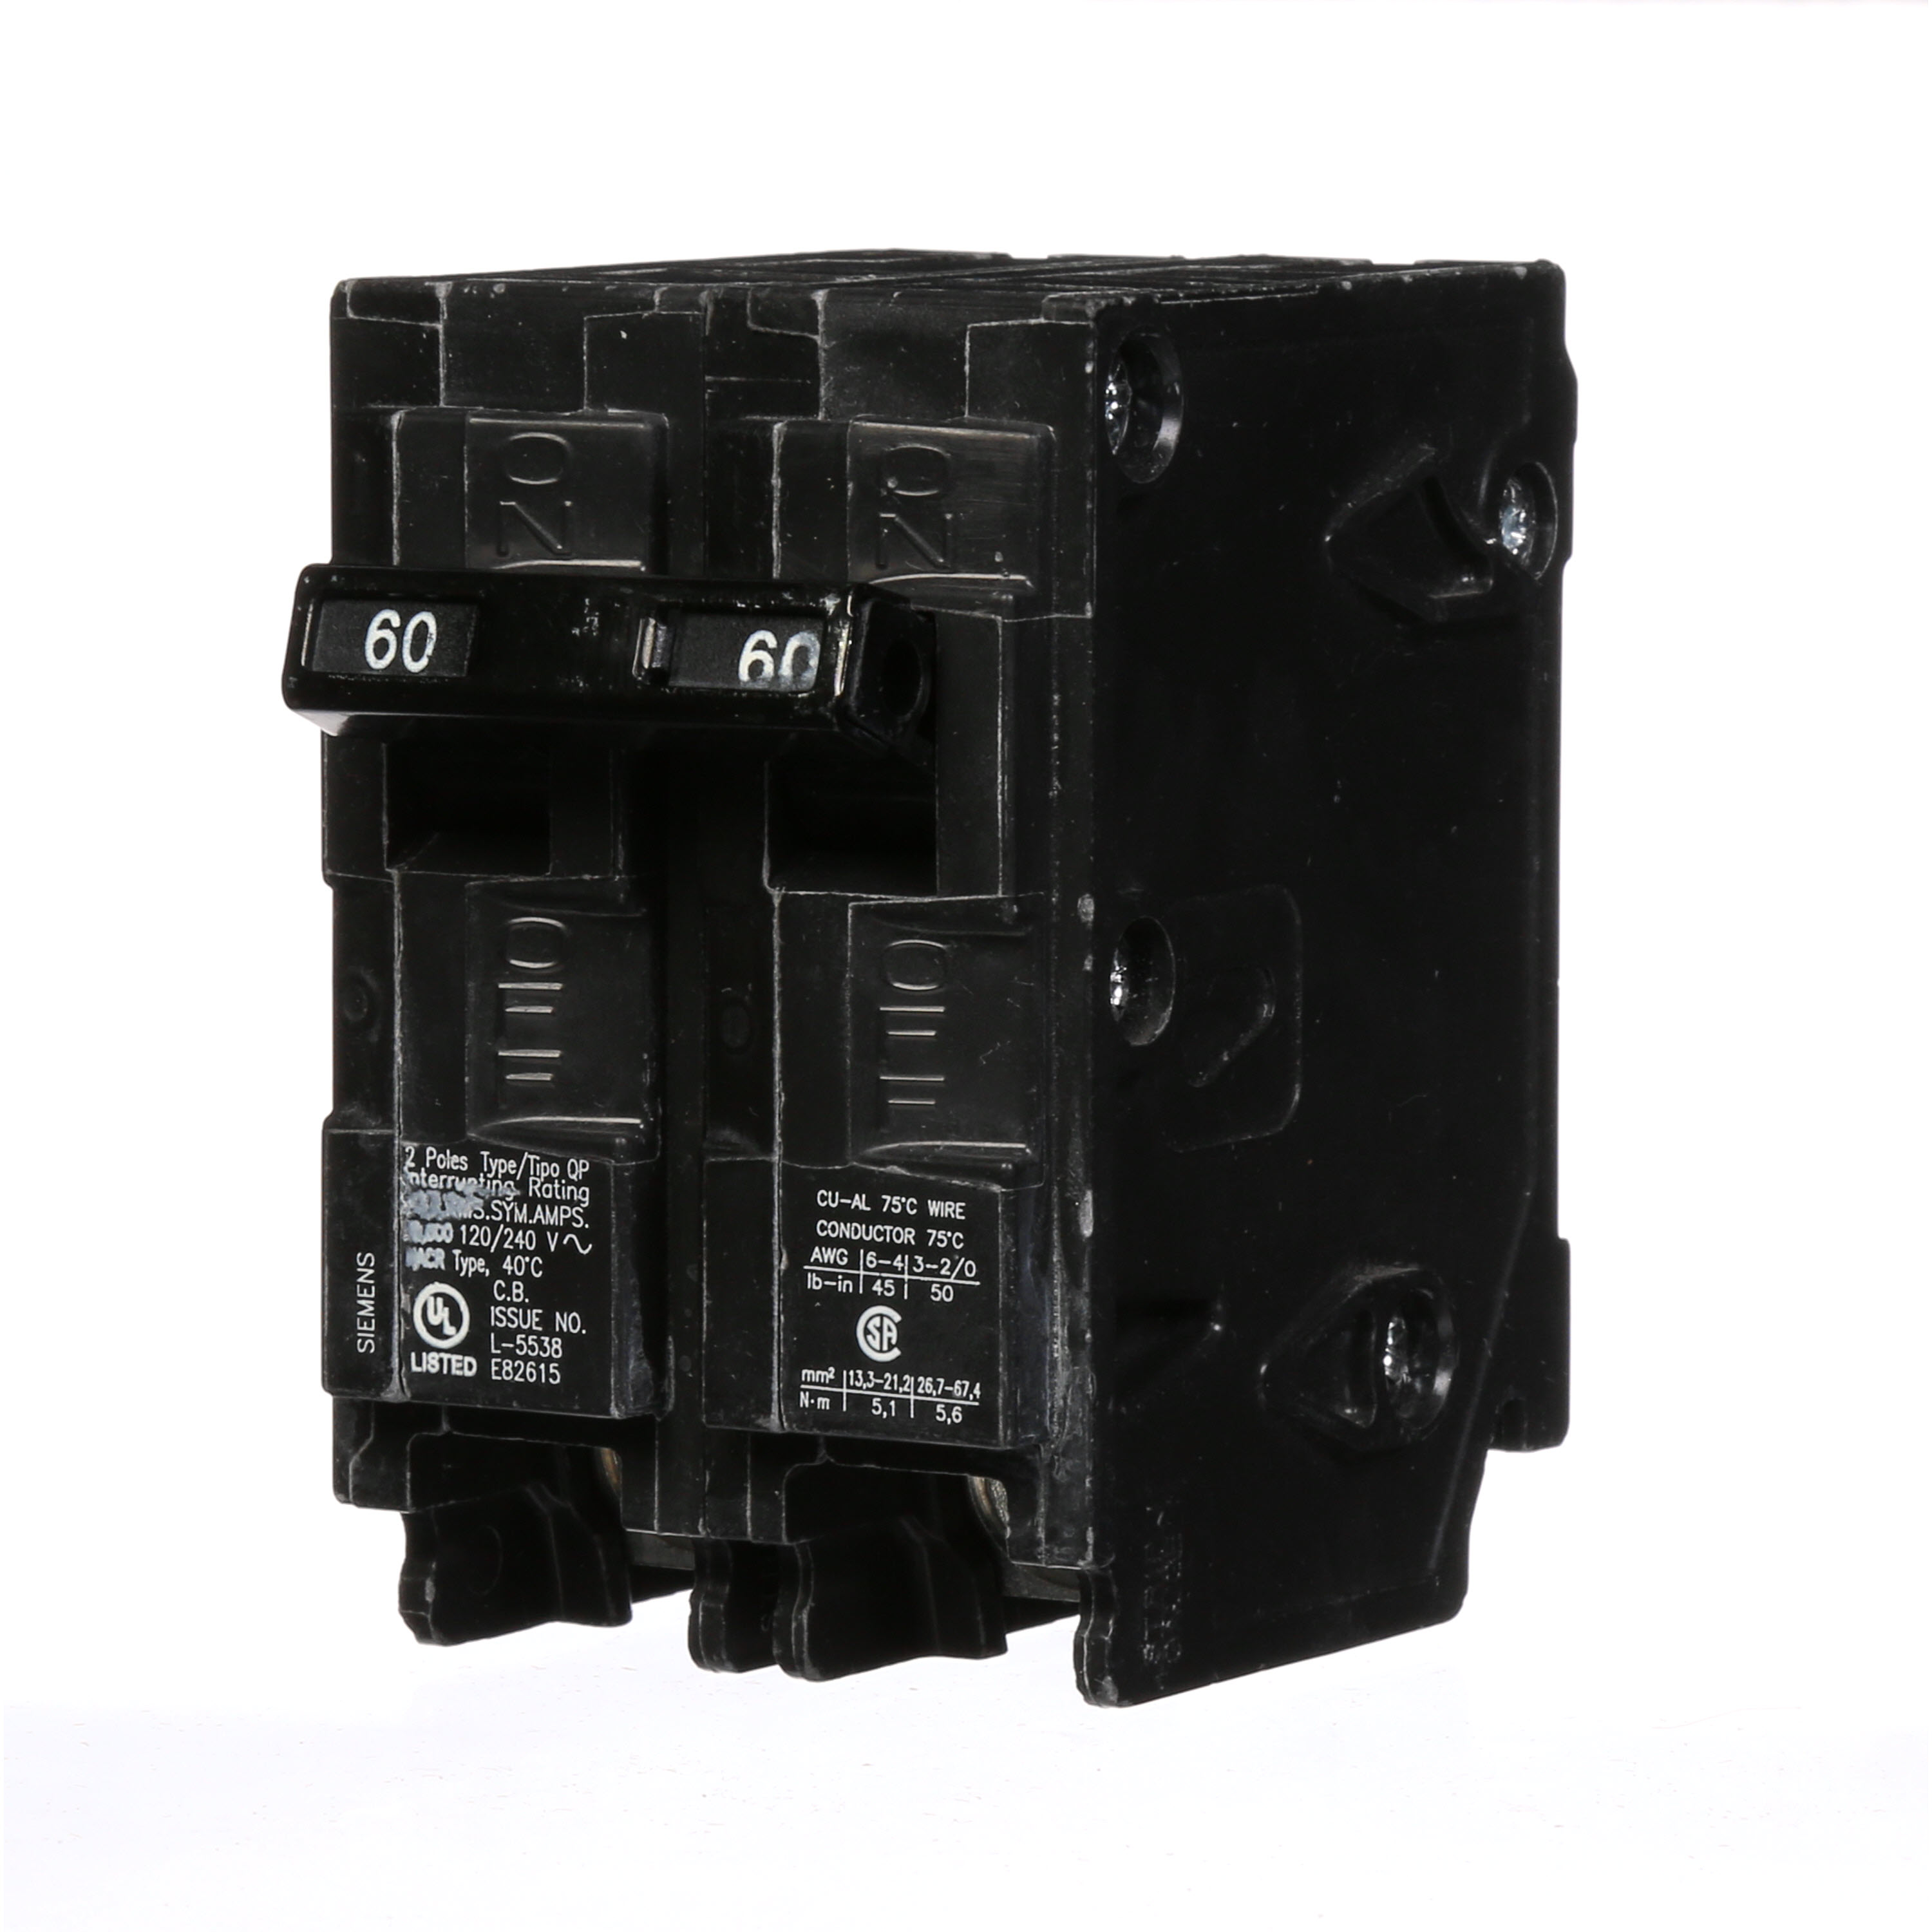 Siemens Low Voltage Residential Circuit Breakers Miniature Thermal Mag Circuit Breakers - Type QP/MP, 2-Pole, 120/240VAC are Circuit Protection Load Center Mains, Feeders, and Miniature Circuit Breakers. Type QP/MP Application Electrical Distribution Standard UL 489 Voltage Rating 120/240V Amperage Rating 60A Trip Range Thermal Magnetic Interrupt Rating 10 AIC Number Of Poles 2P